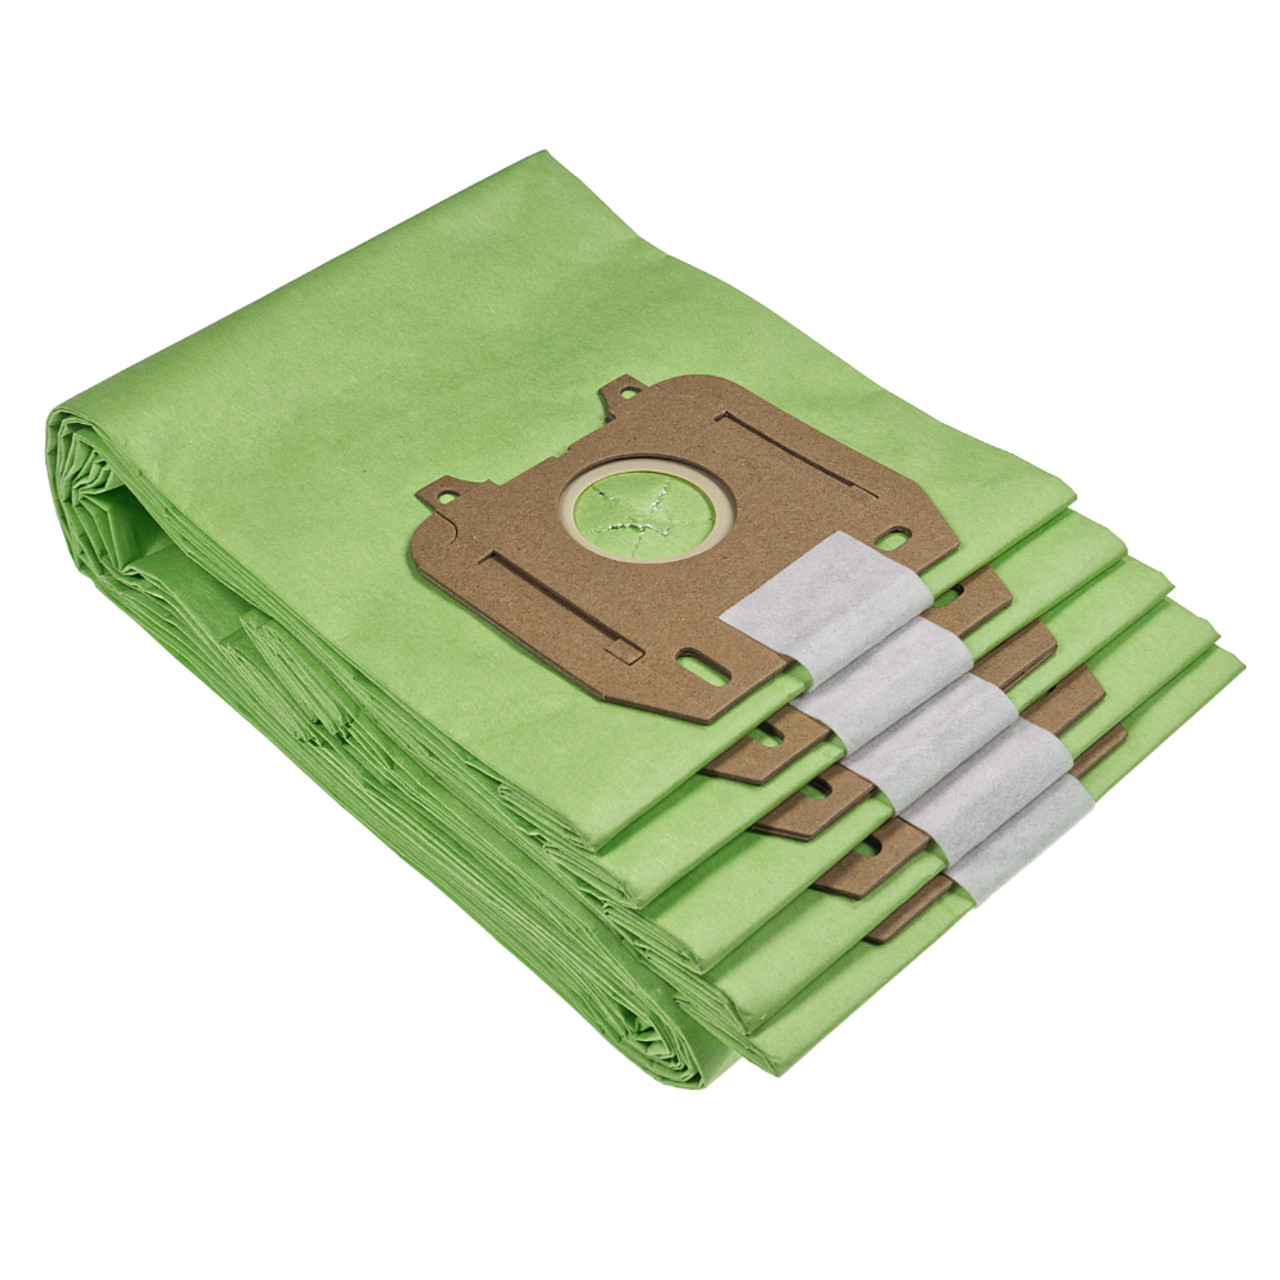 Buy Oreck XL Upright Vacuum Cleaner Bags from Canada at McHardyVaccom